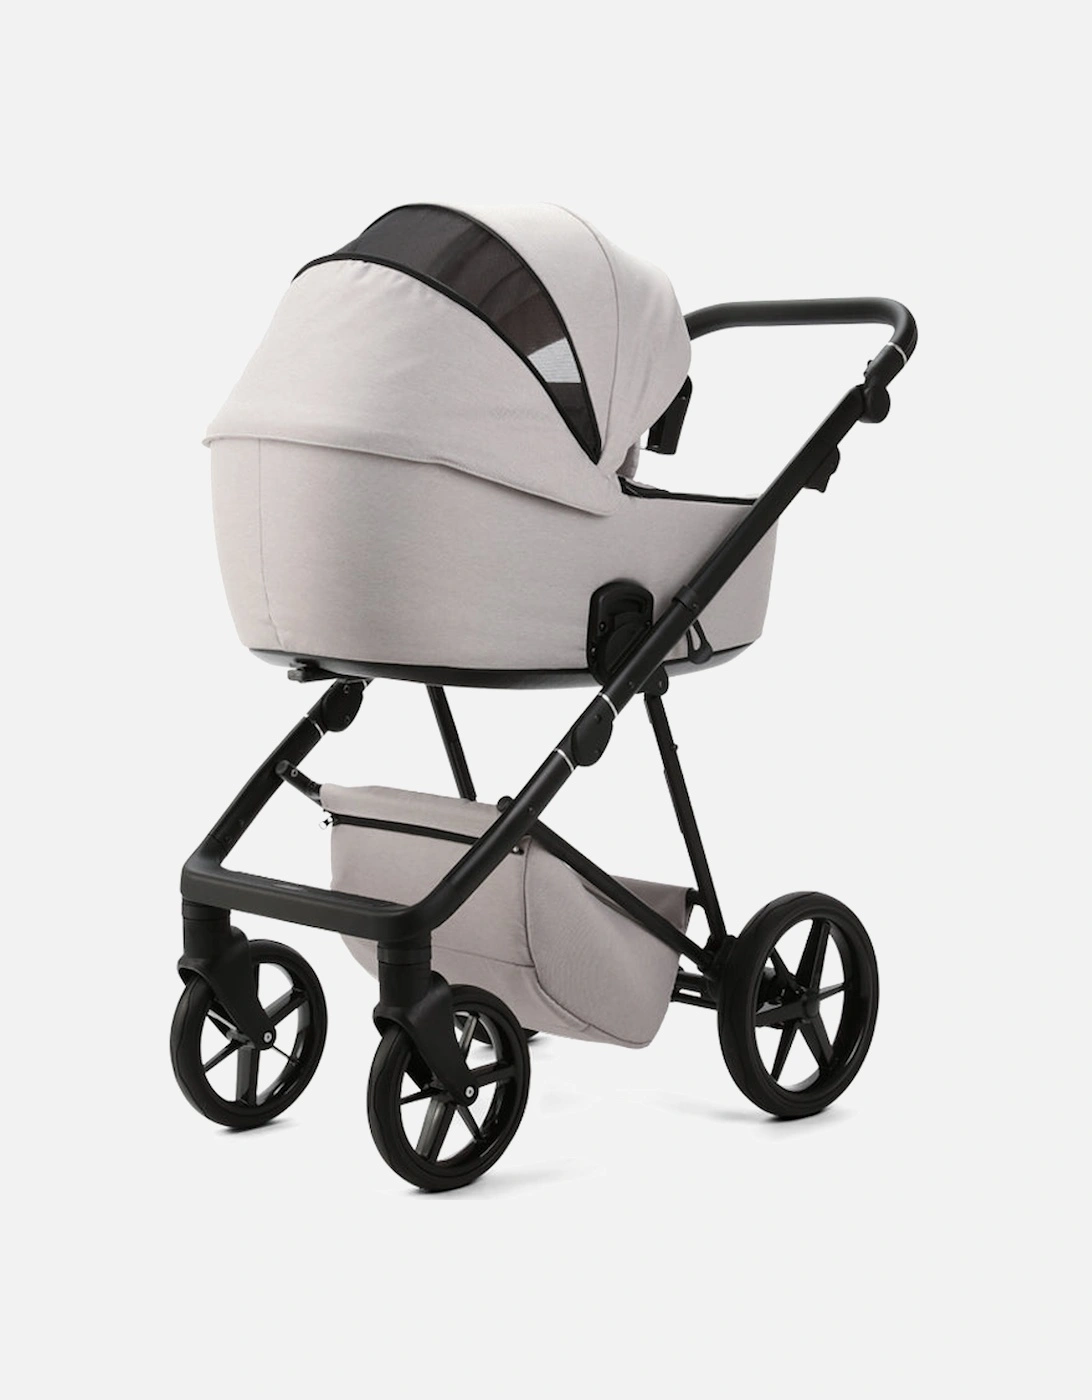 Milano Evo Biscuit - Chassis, Carry Cot, Seat Unit & Accessories